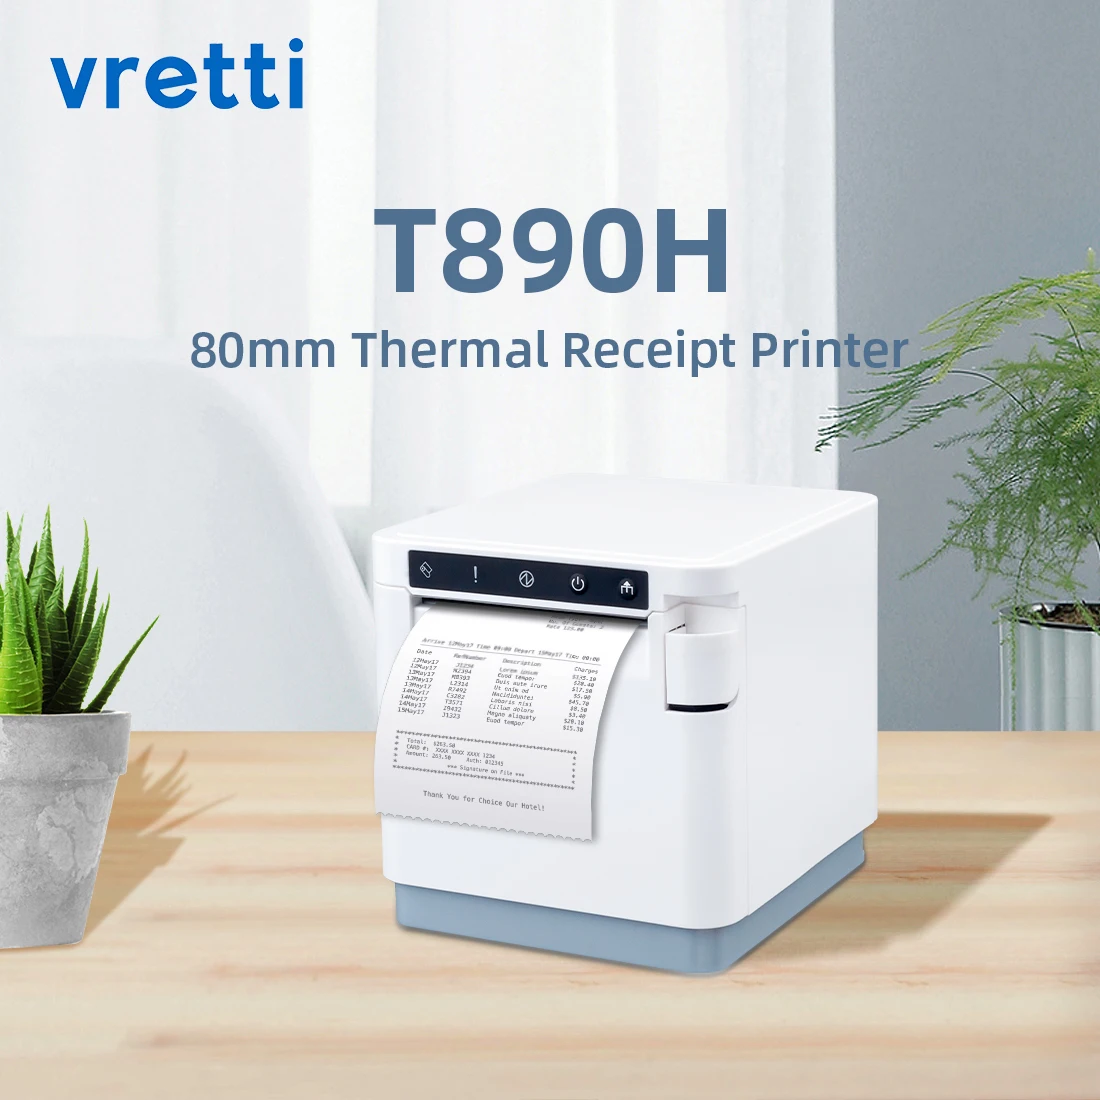 Vretti T890H 80mm Thermal Receipt Printer Lan For Small Businesses High Speed Printing  For Supermarket Restaurant Bill POS